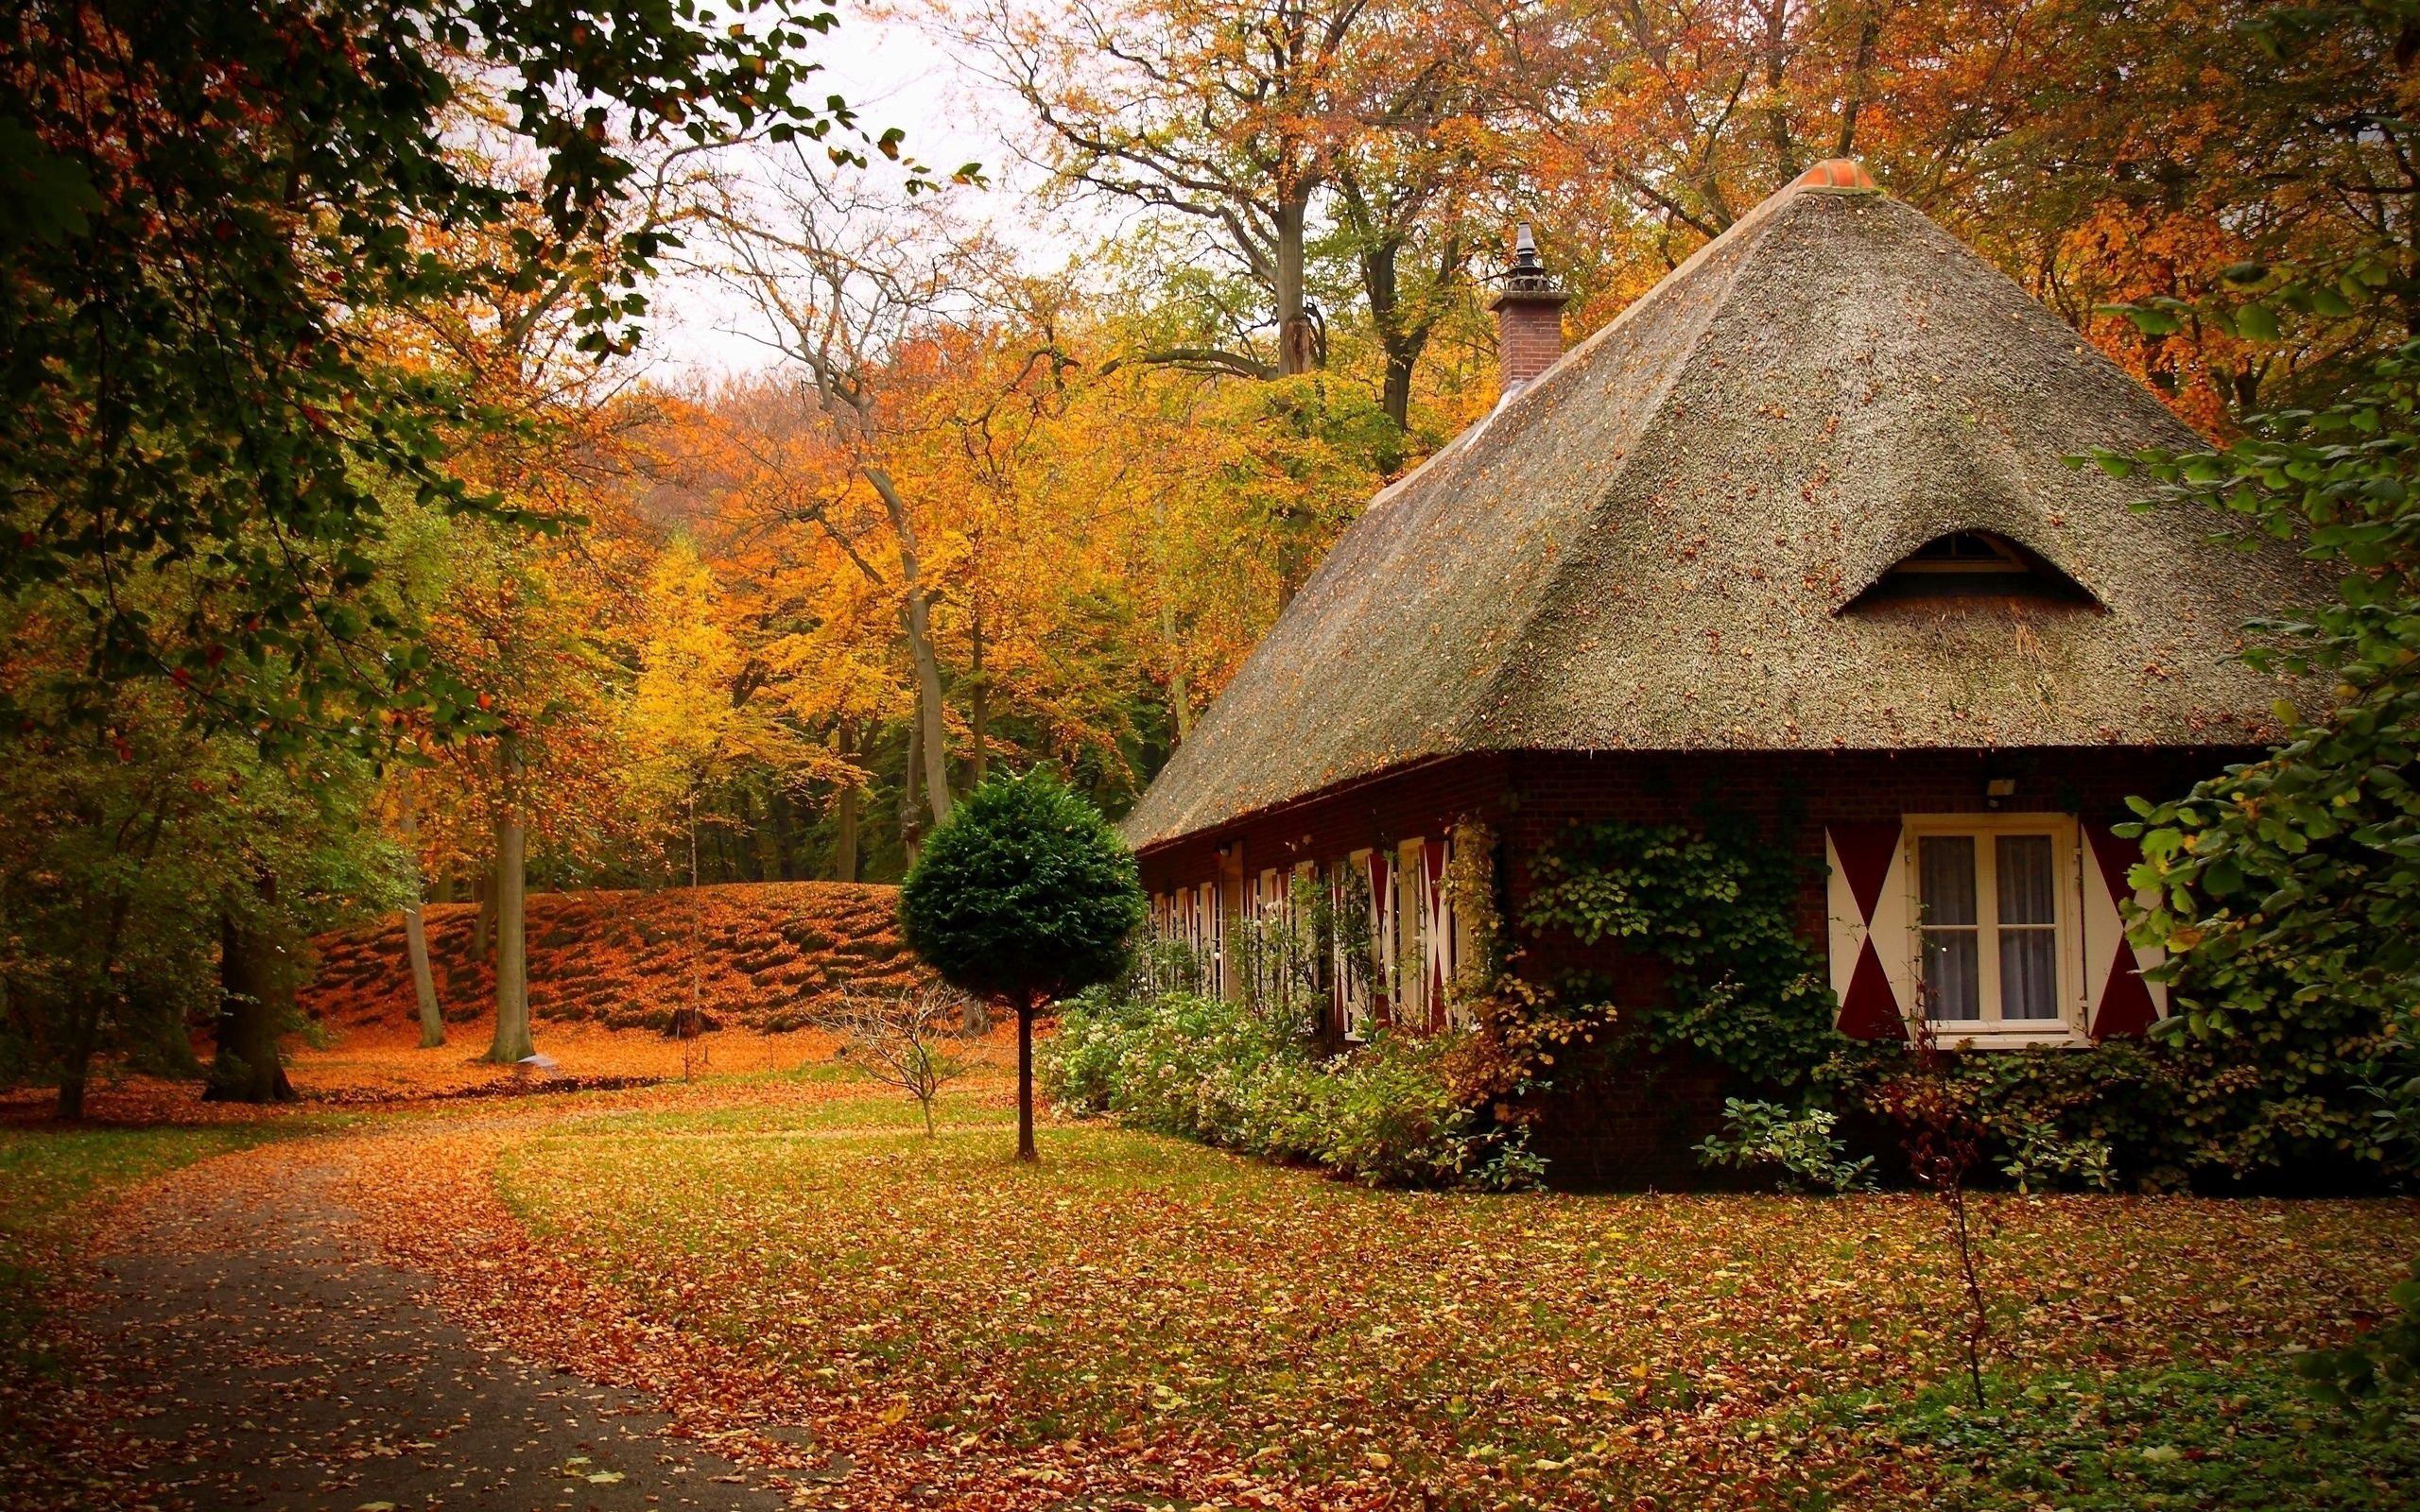 landscape, nature, autumn, forest, small house, lodge, cabins